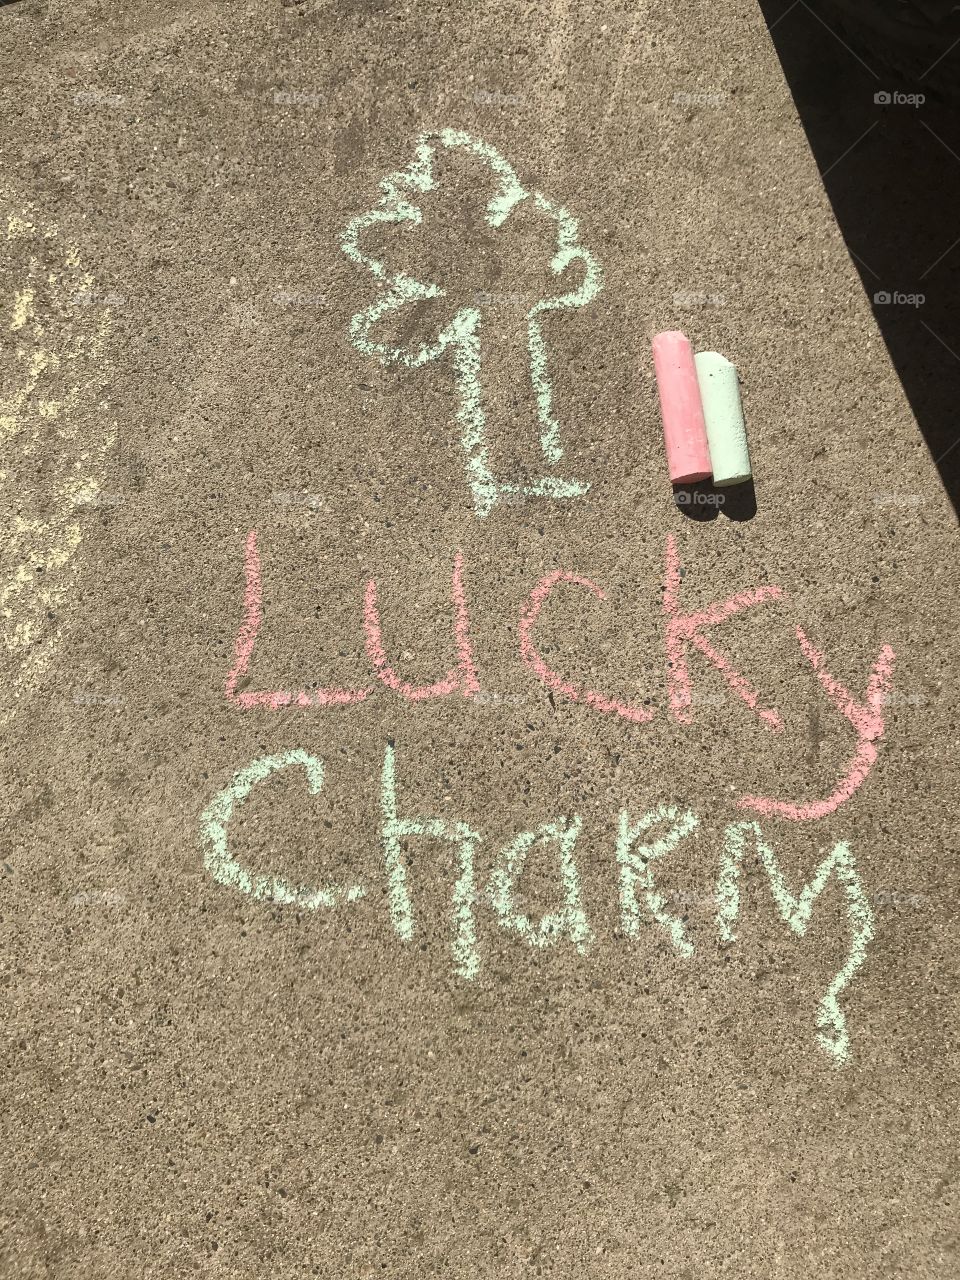 Shamrock Lucky charm drawn on the side walk with red and green sidewalk chalk located in the USA, America 